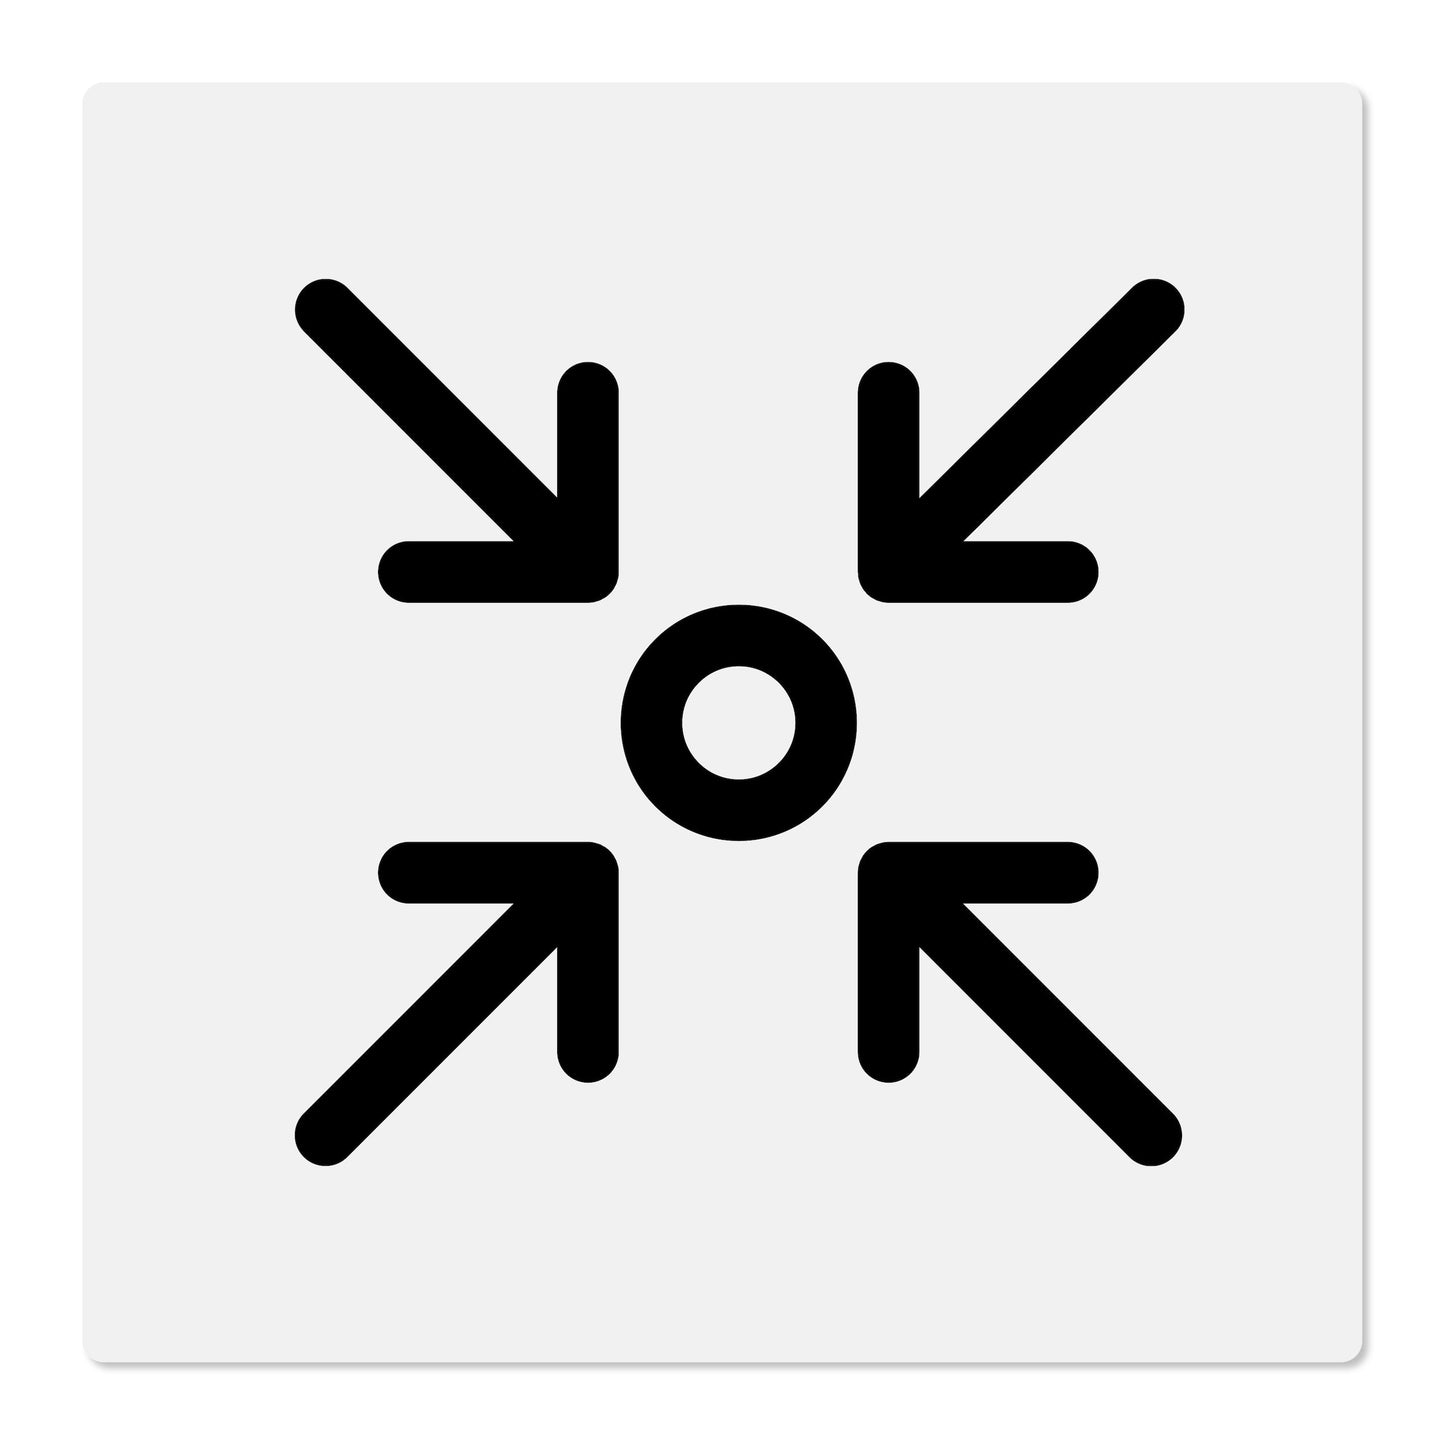 Assembly Point (Pictogram)